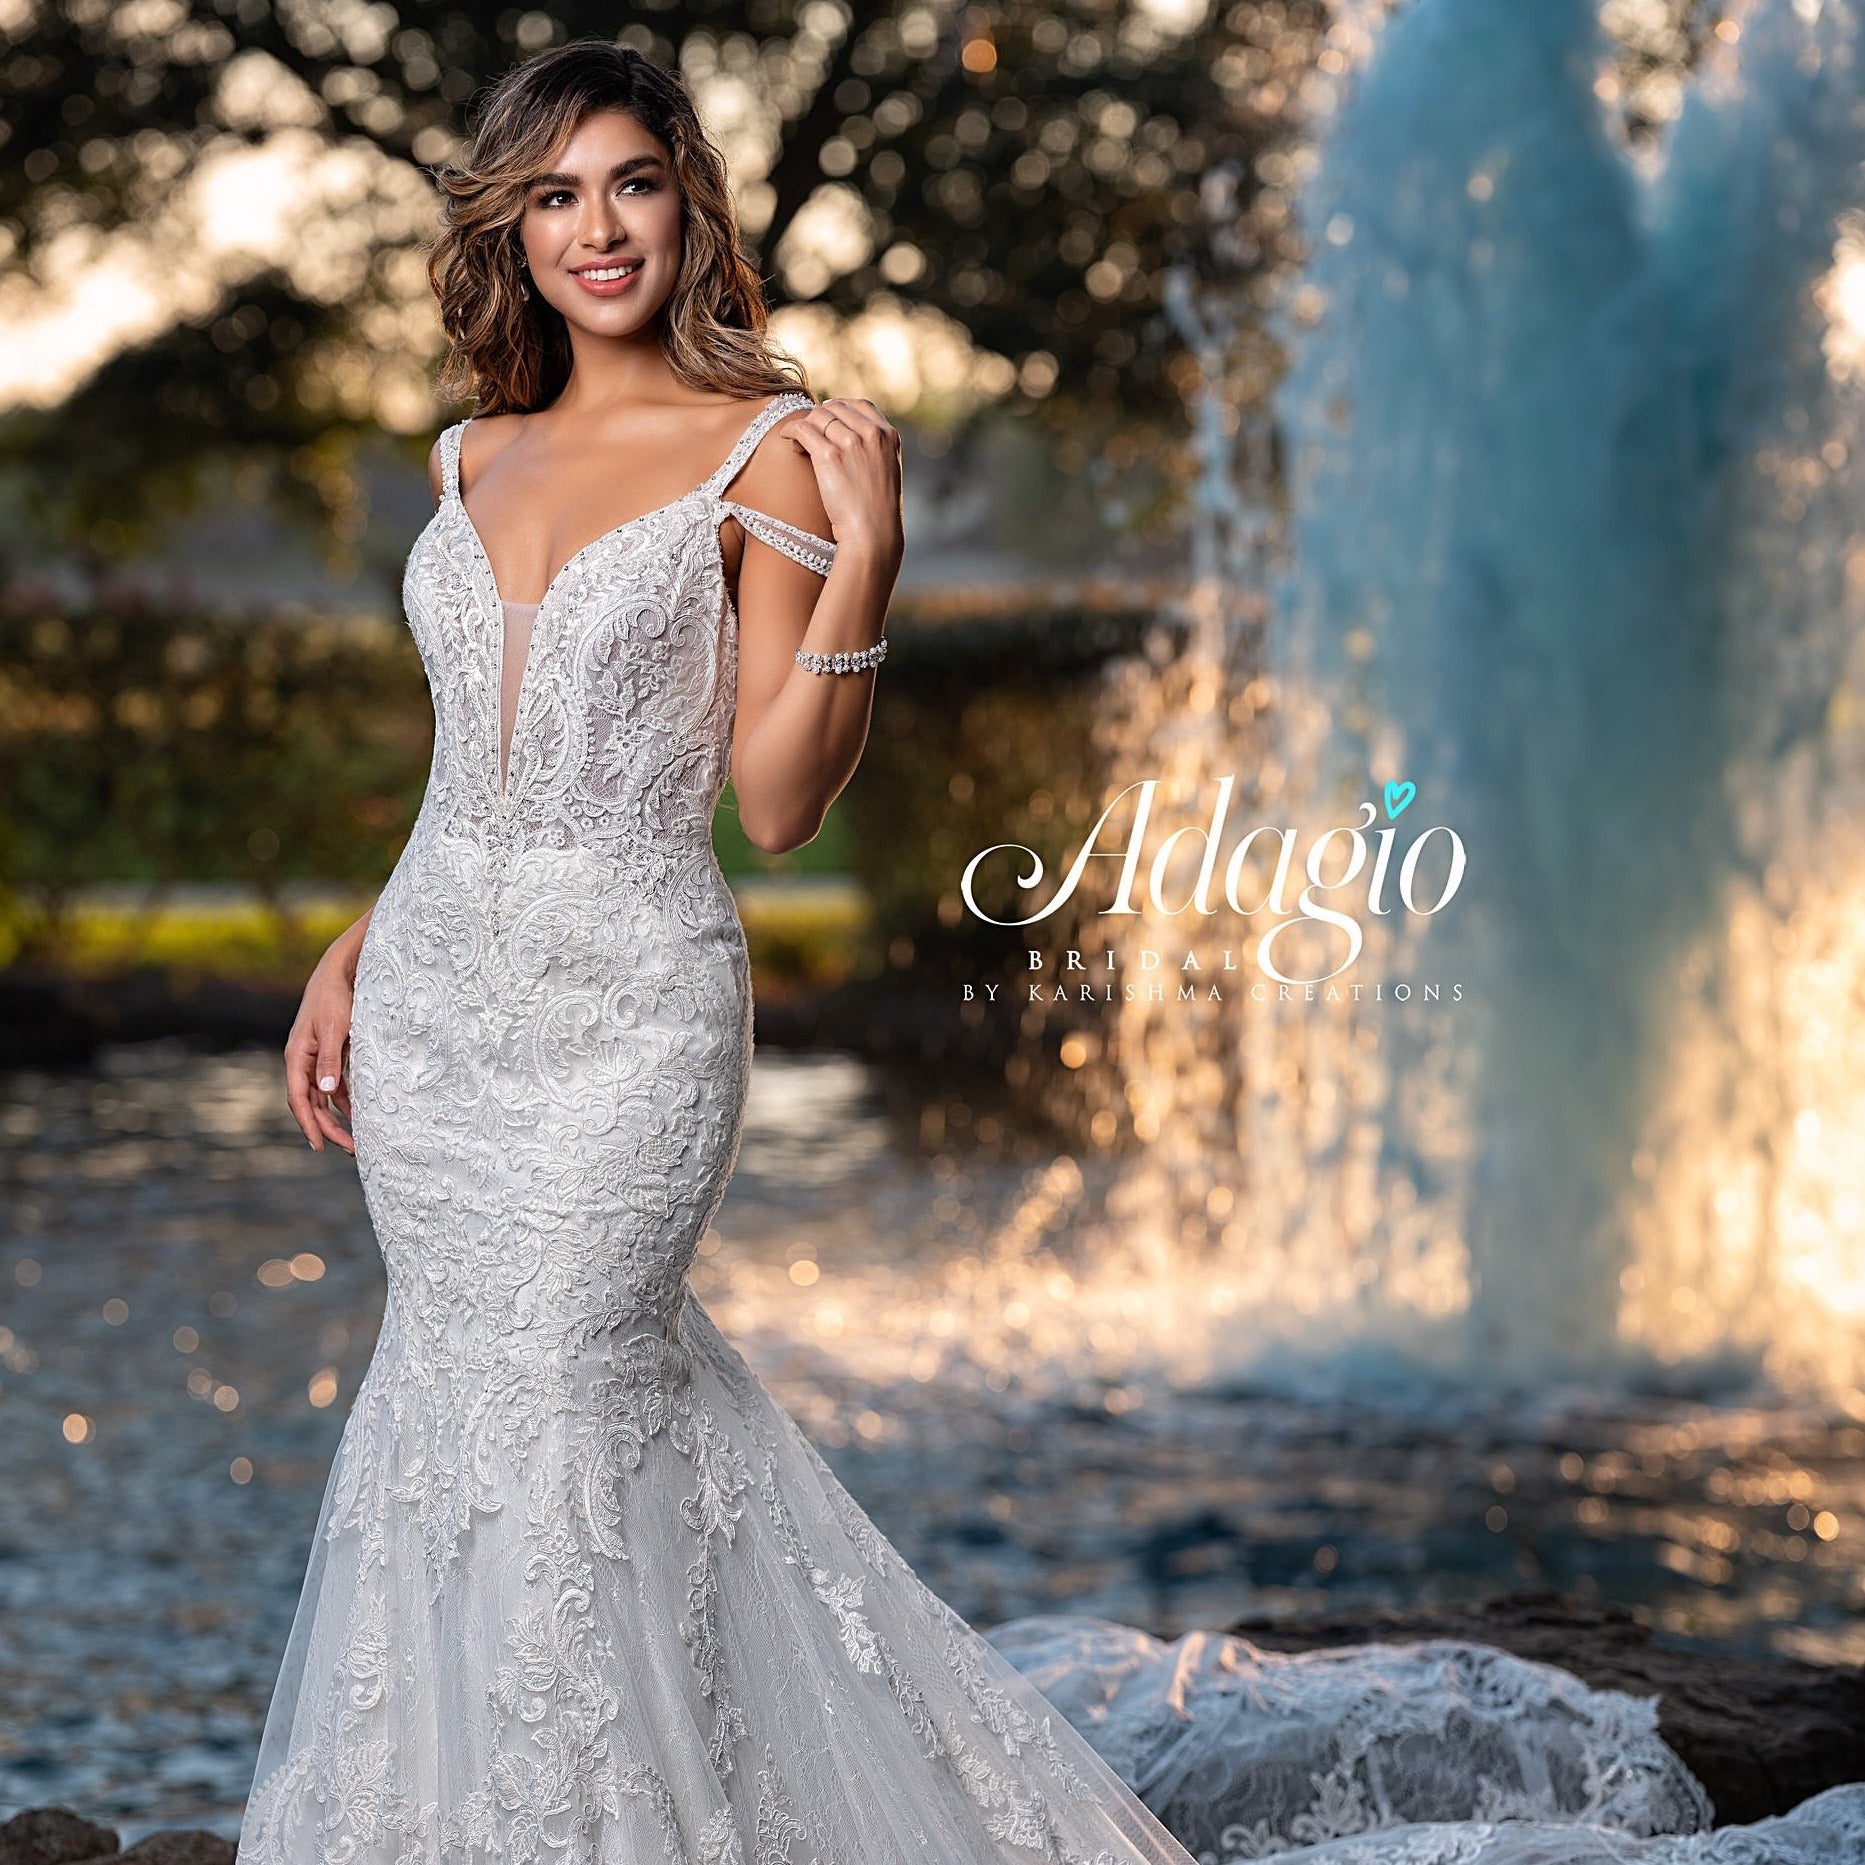 Adagio Bridal W9365 plunging v neckline mermaid embellished lace wedding dress bridal gown with train features double straps one off the shoulder to create cold shoulder effect.  Colors  Ivory  Sizes  00, 0, 2, 4, 6, 8, 10, 12, 14, 16, 18, 20, 22, 24, 26, 28, 30 